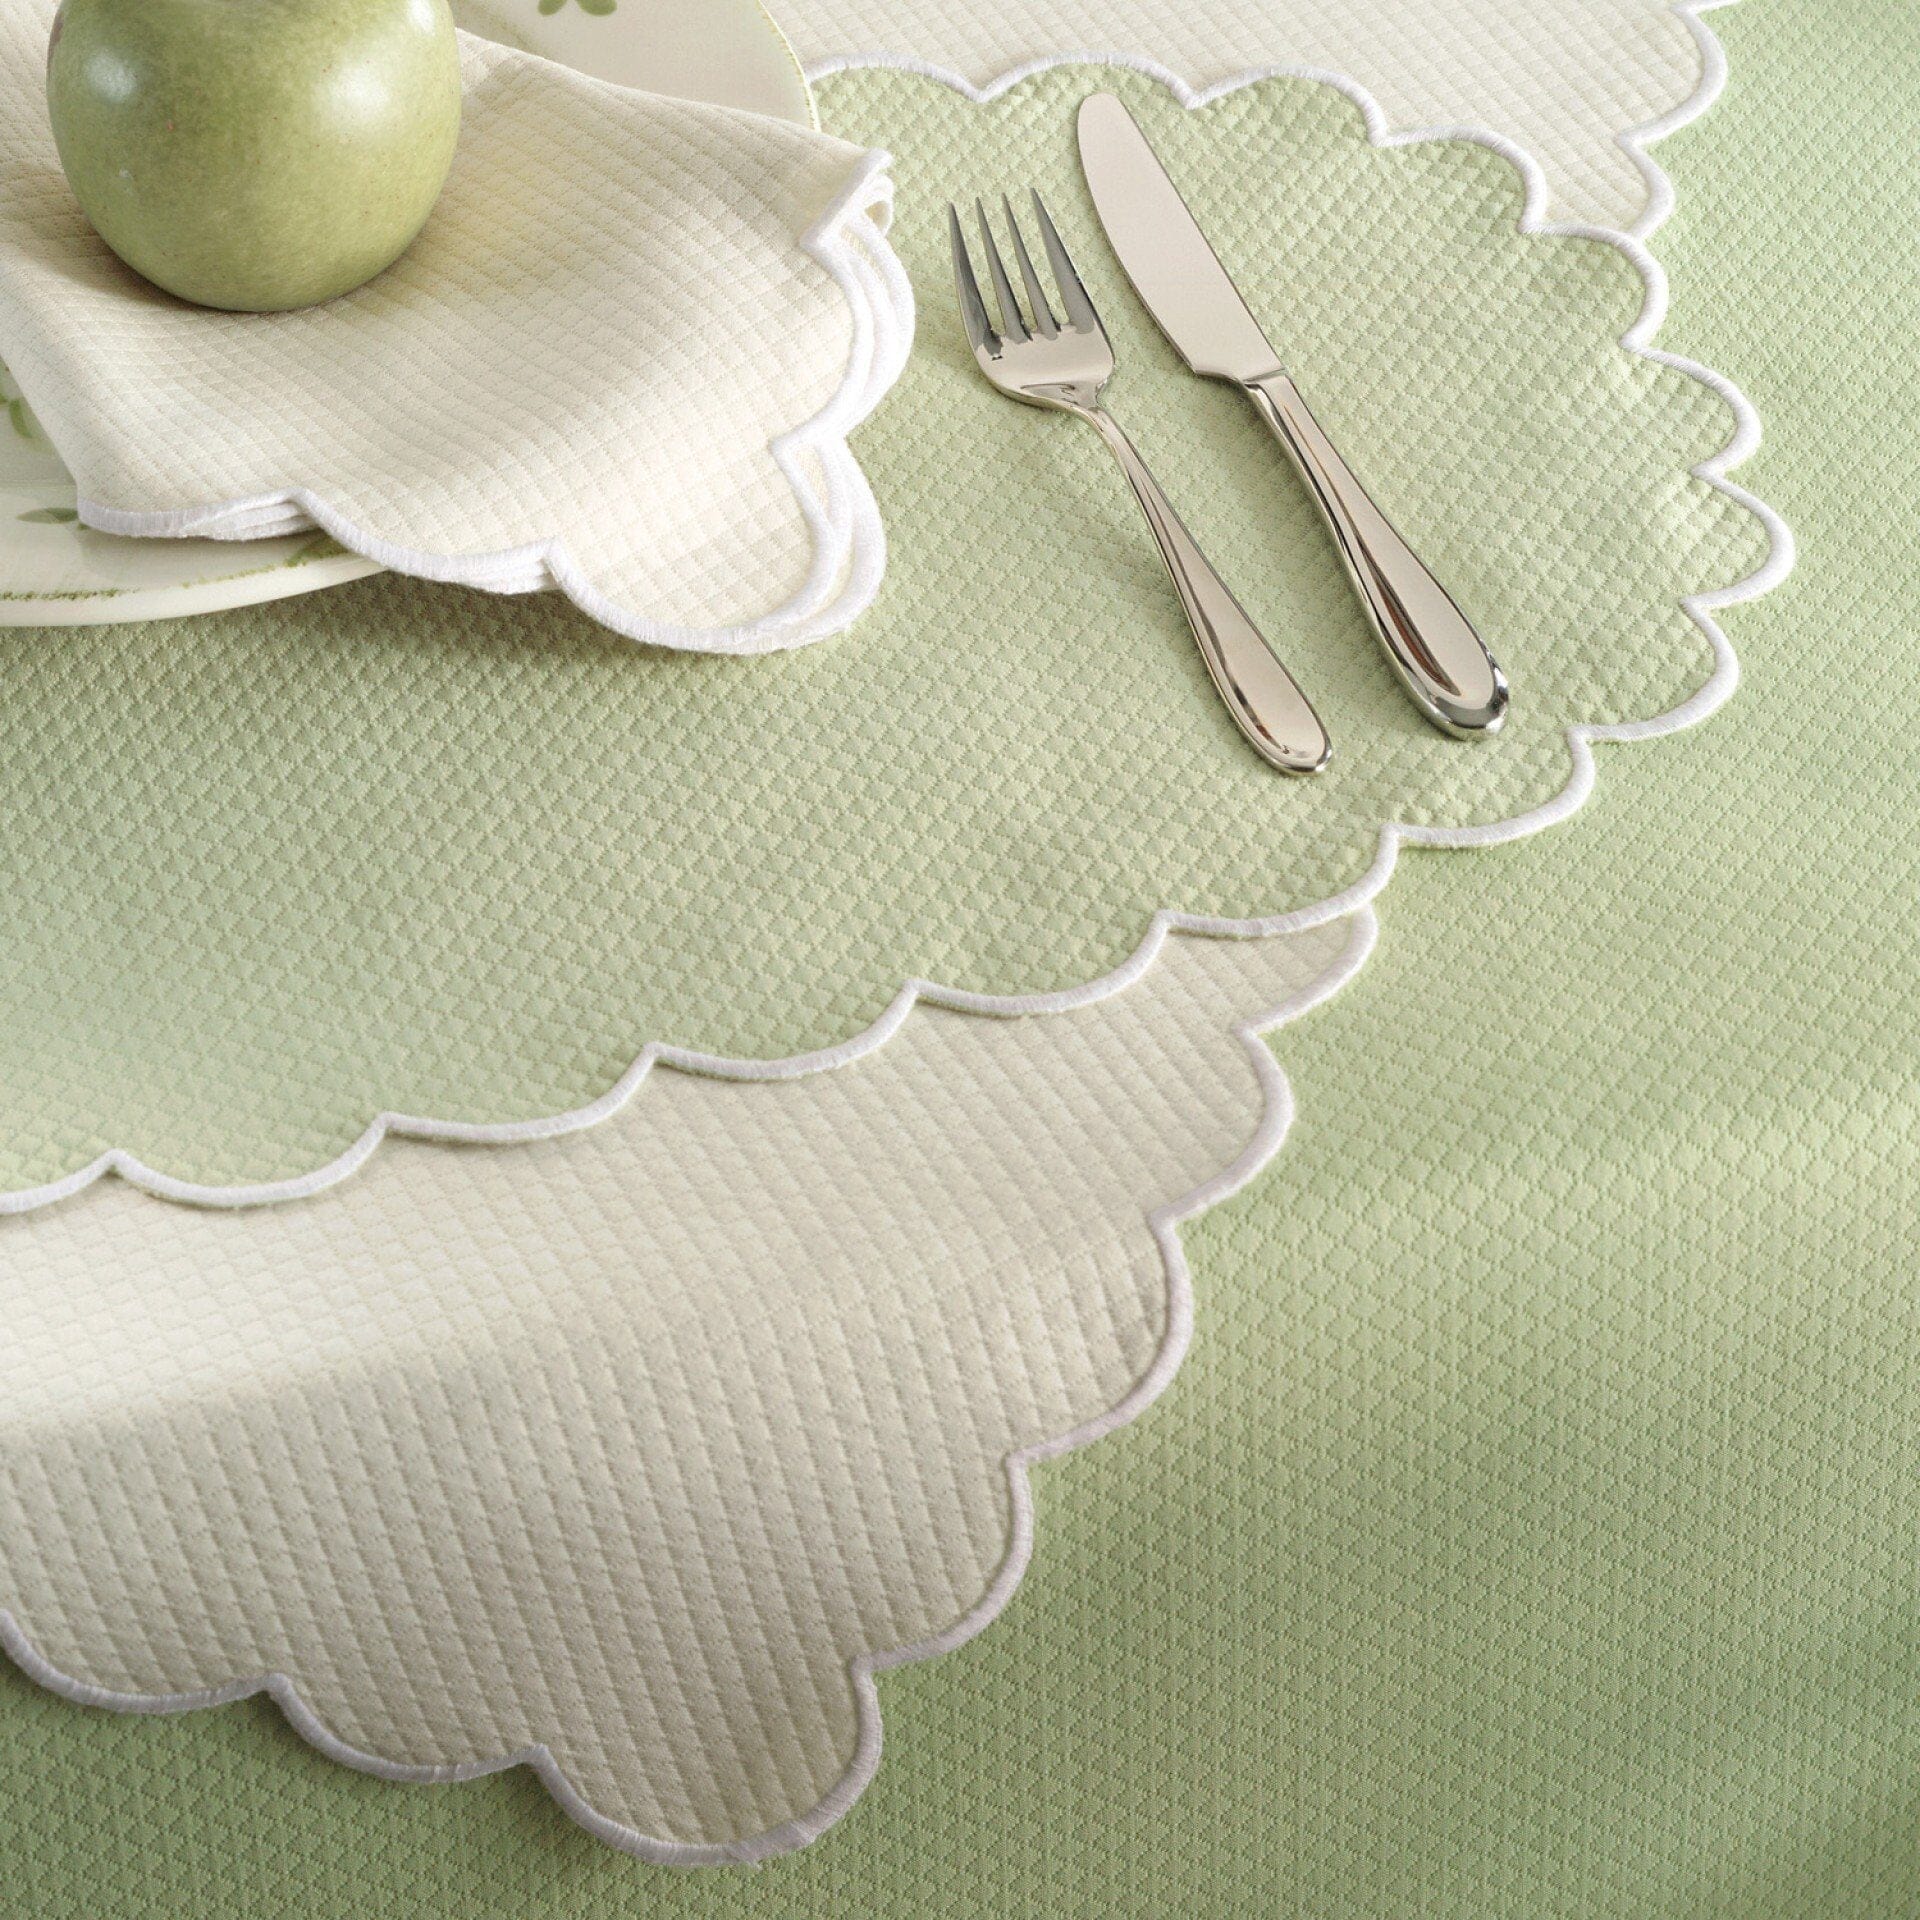 Fig Linens - Savannah Gardens by Matouk - Placemats and Napkins